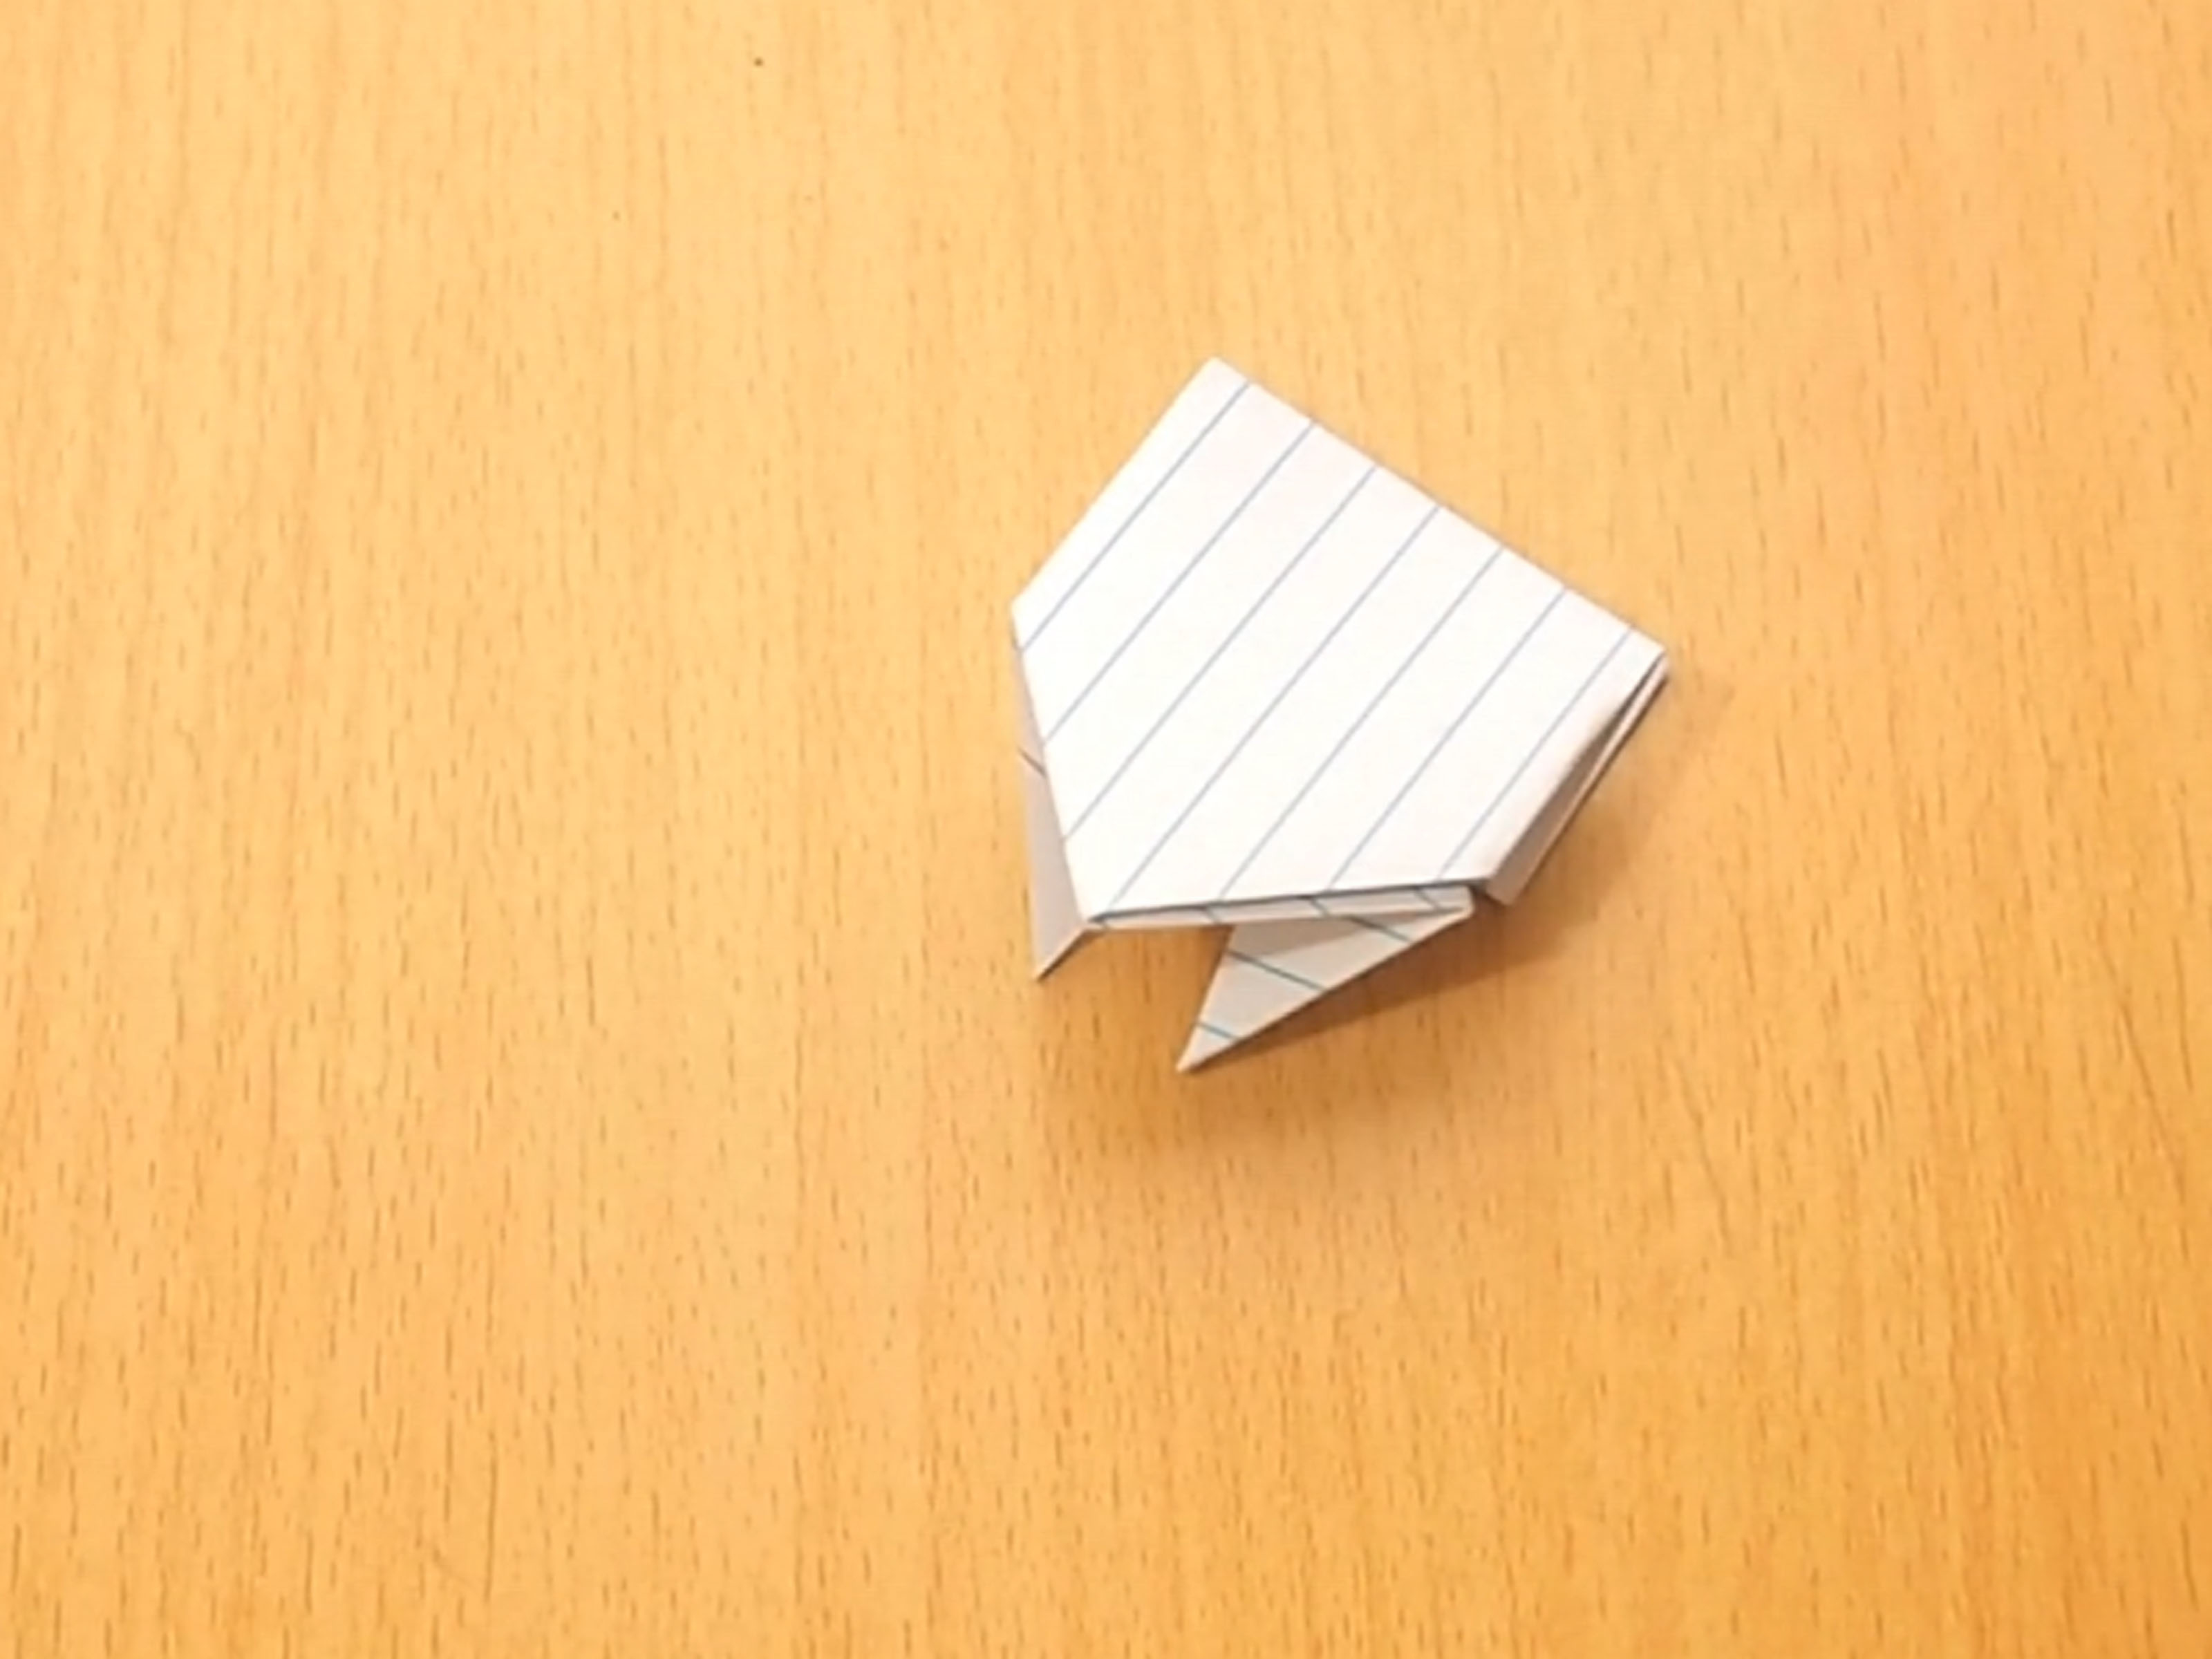 Origami Wolf Tutorial How To Make An Origami Jumping Frog From An Index Card 10 Steps